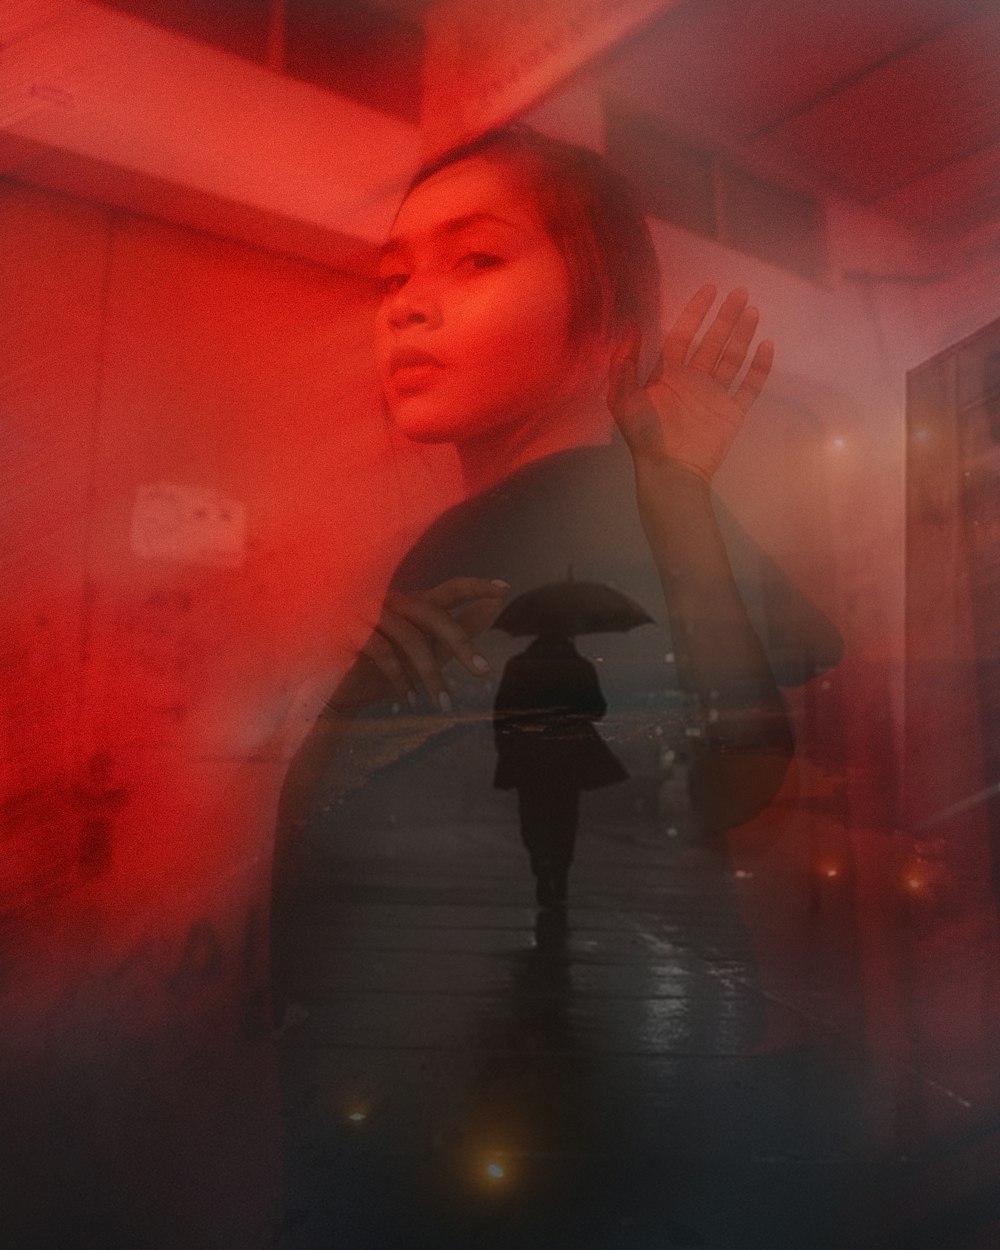 a woman holding an umbrella standing in front of a red light